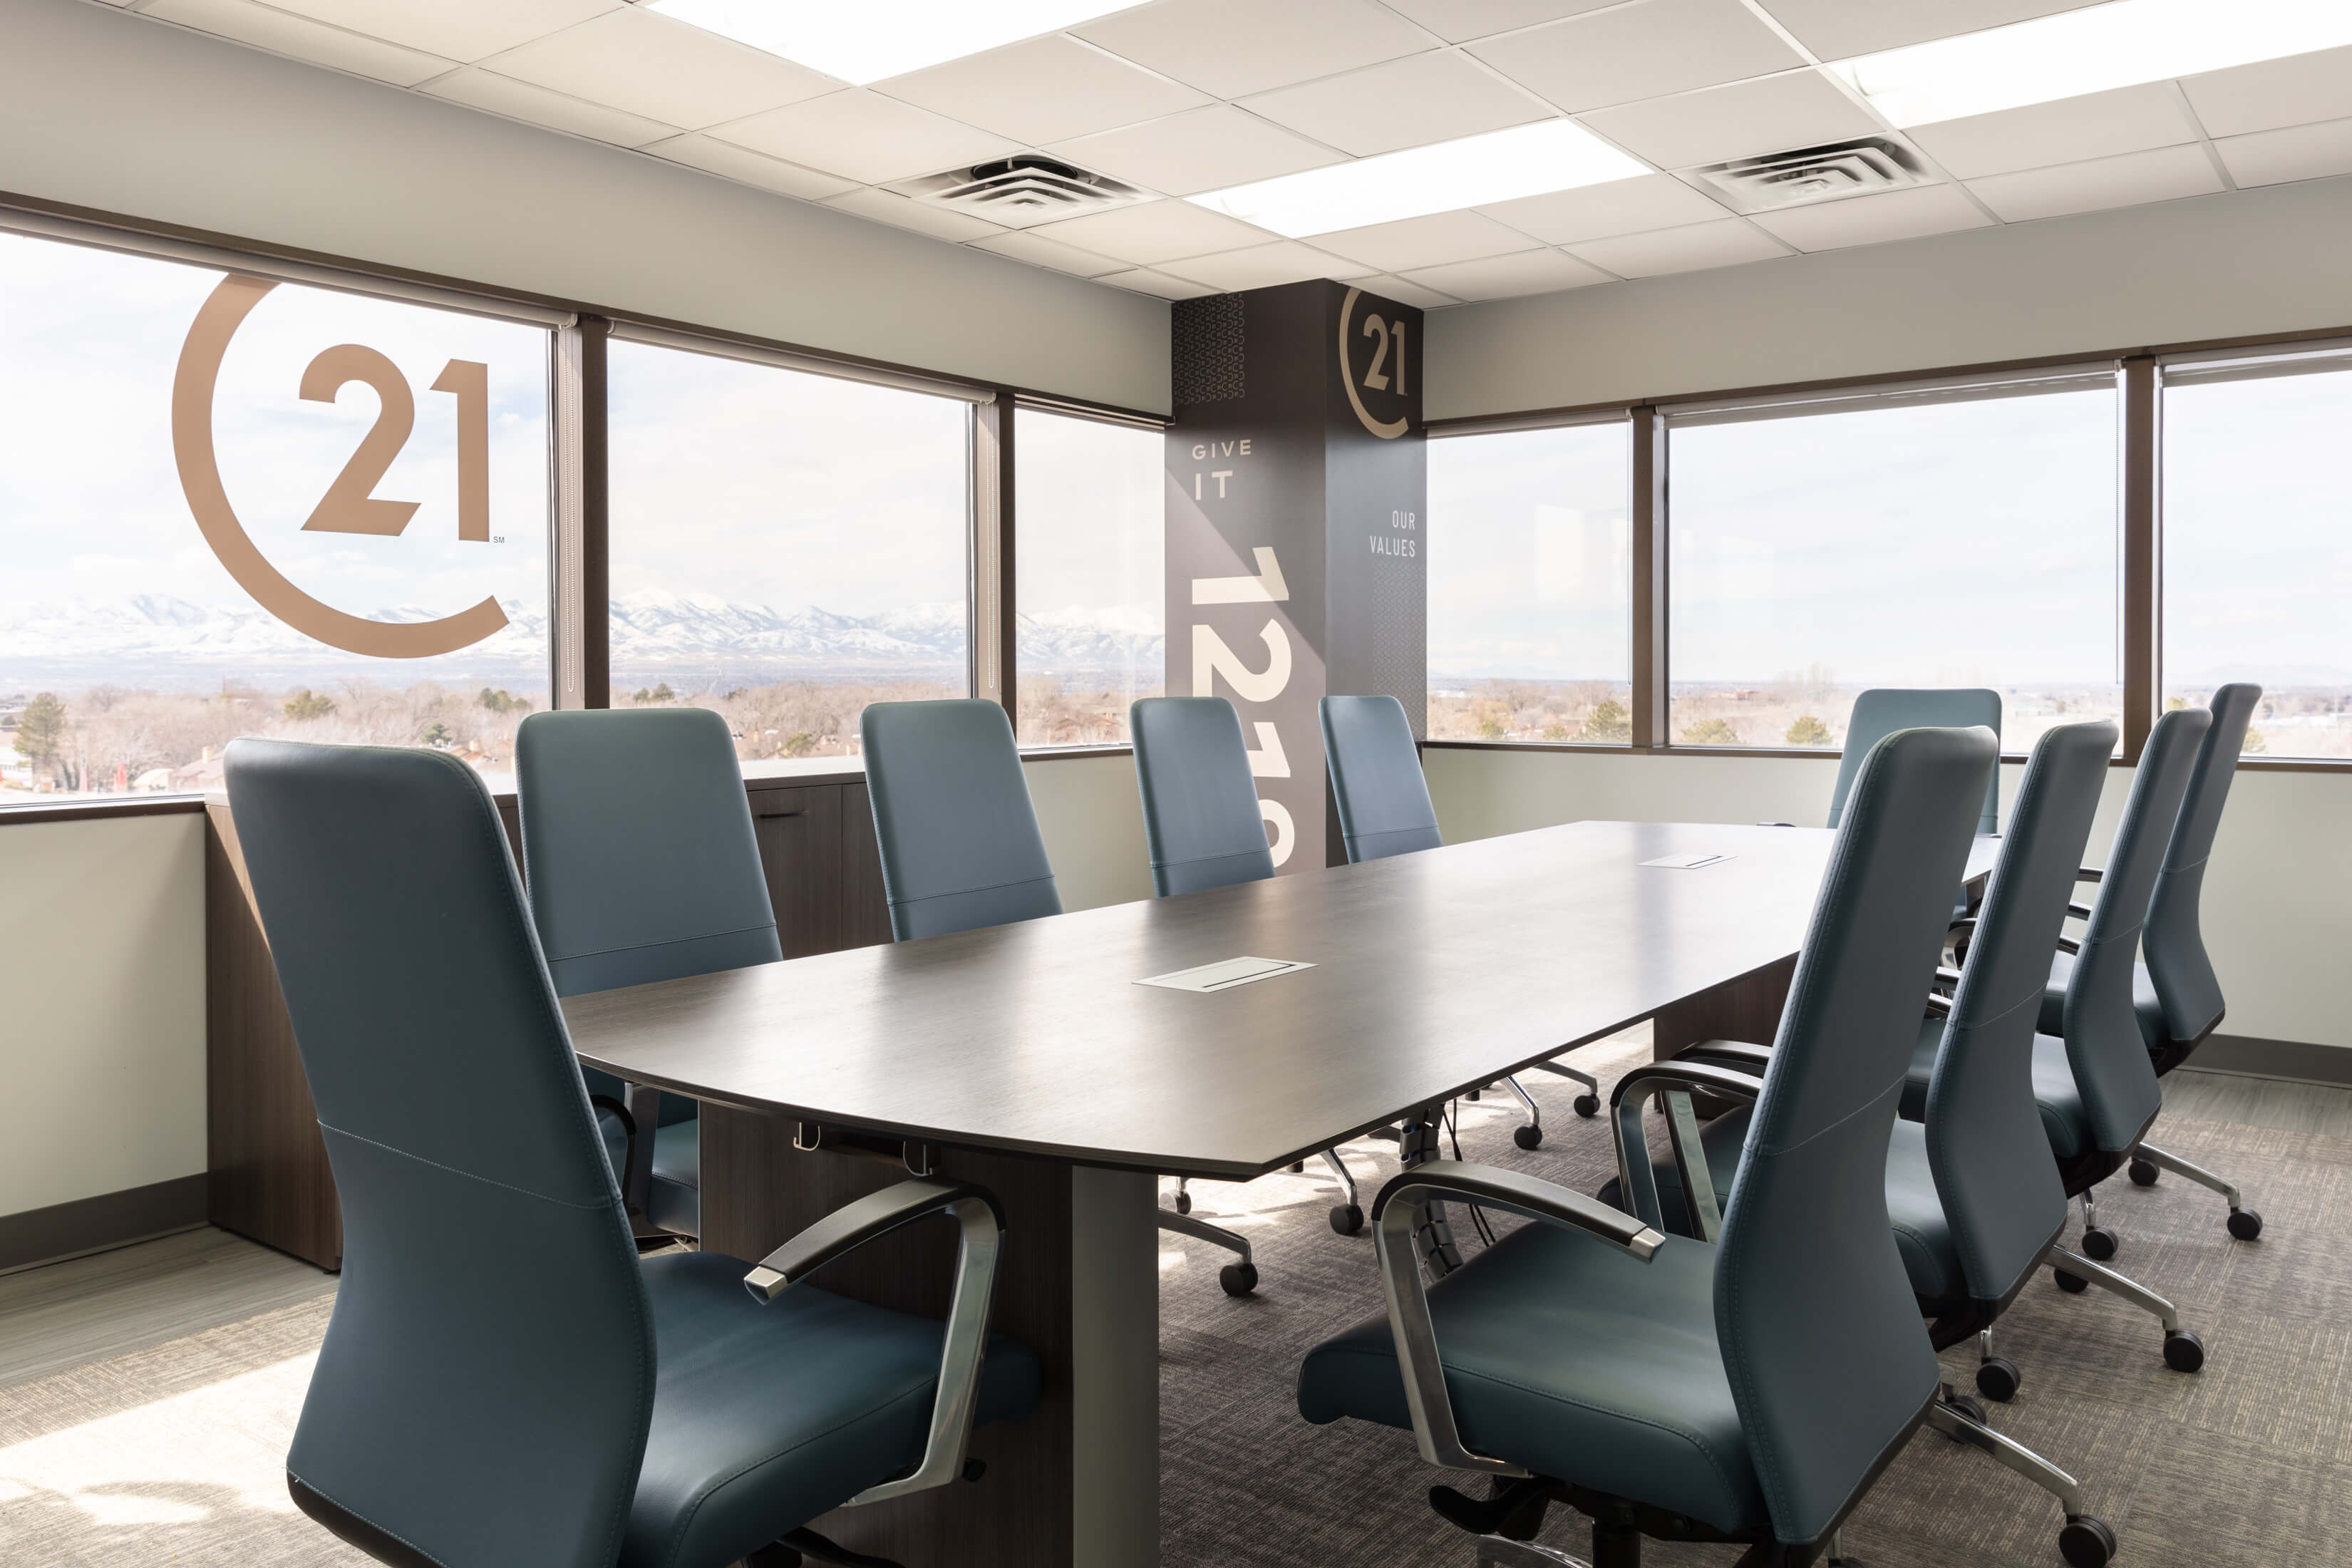 USED OFFICE FURNITURE: THE PROS AND CONS